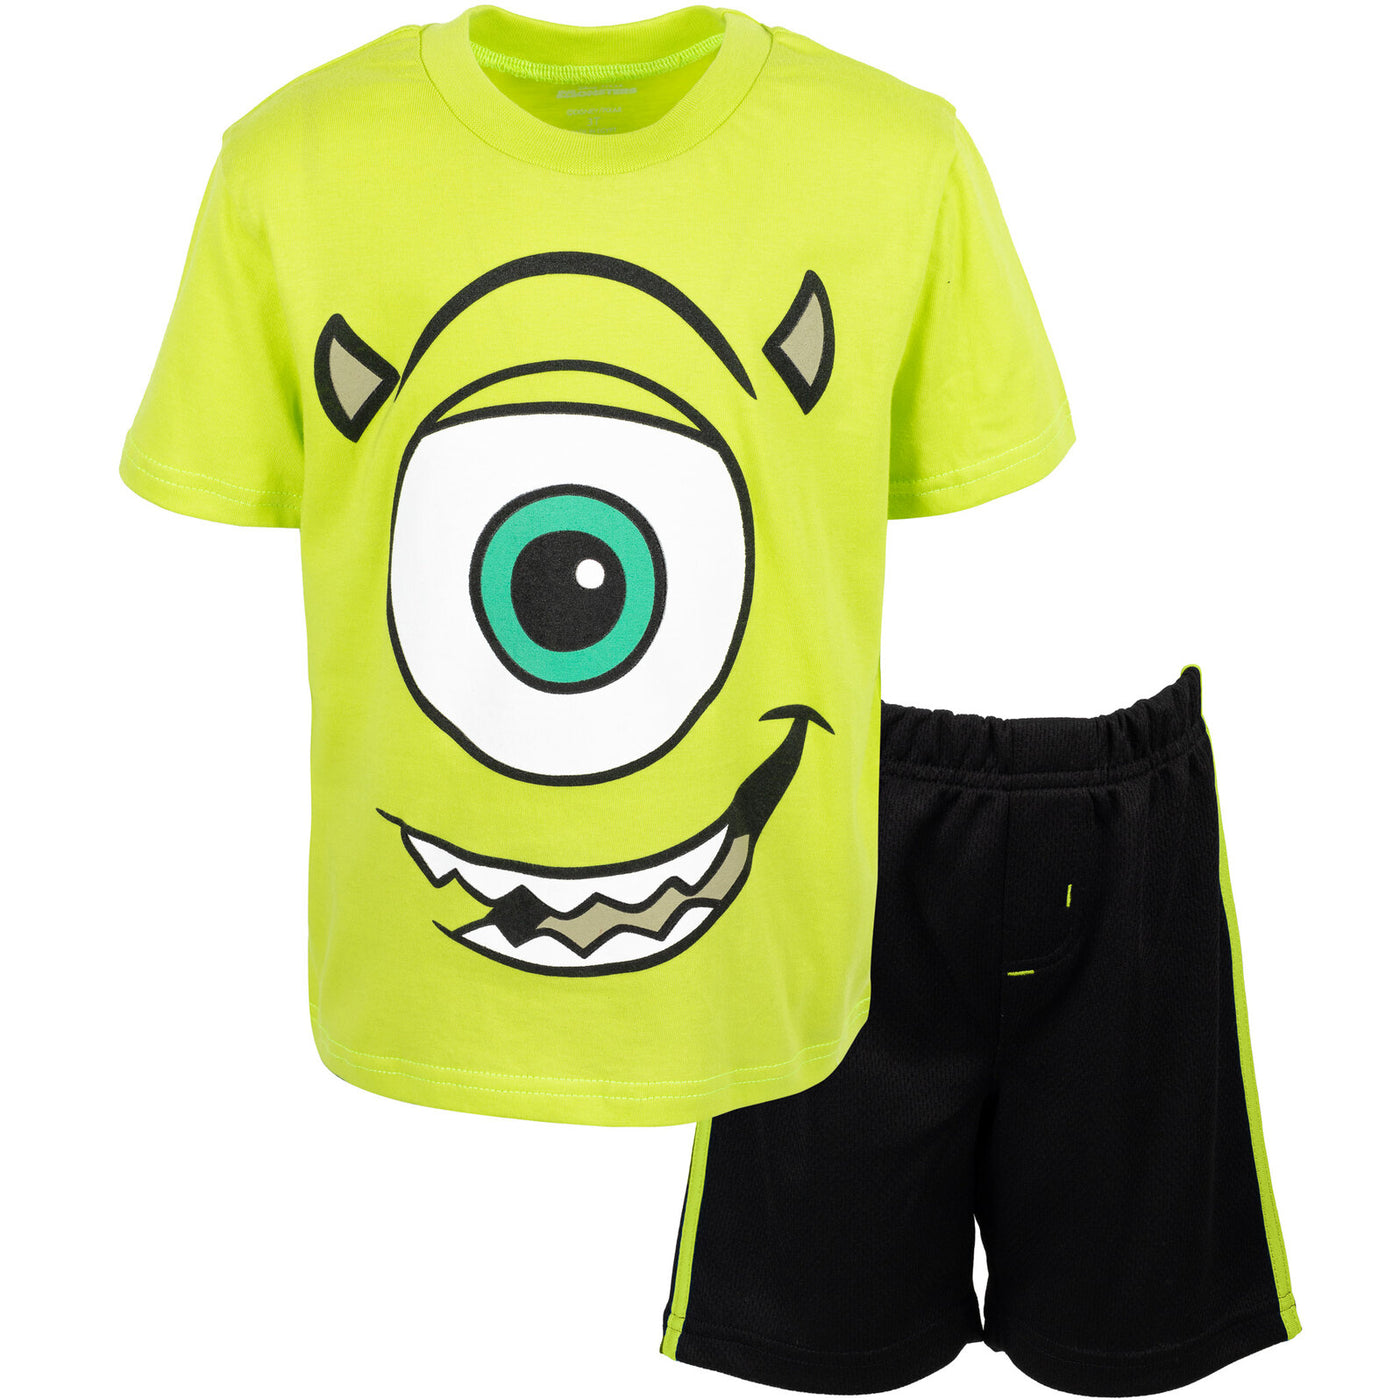 Disney Monsters Inc. Mike Wazowski T-Shirt and Mesh Shorts Outfit Set